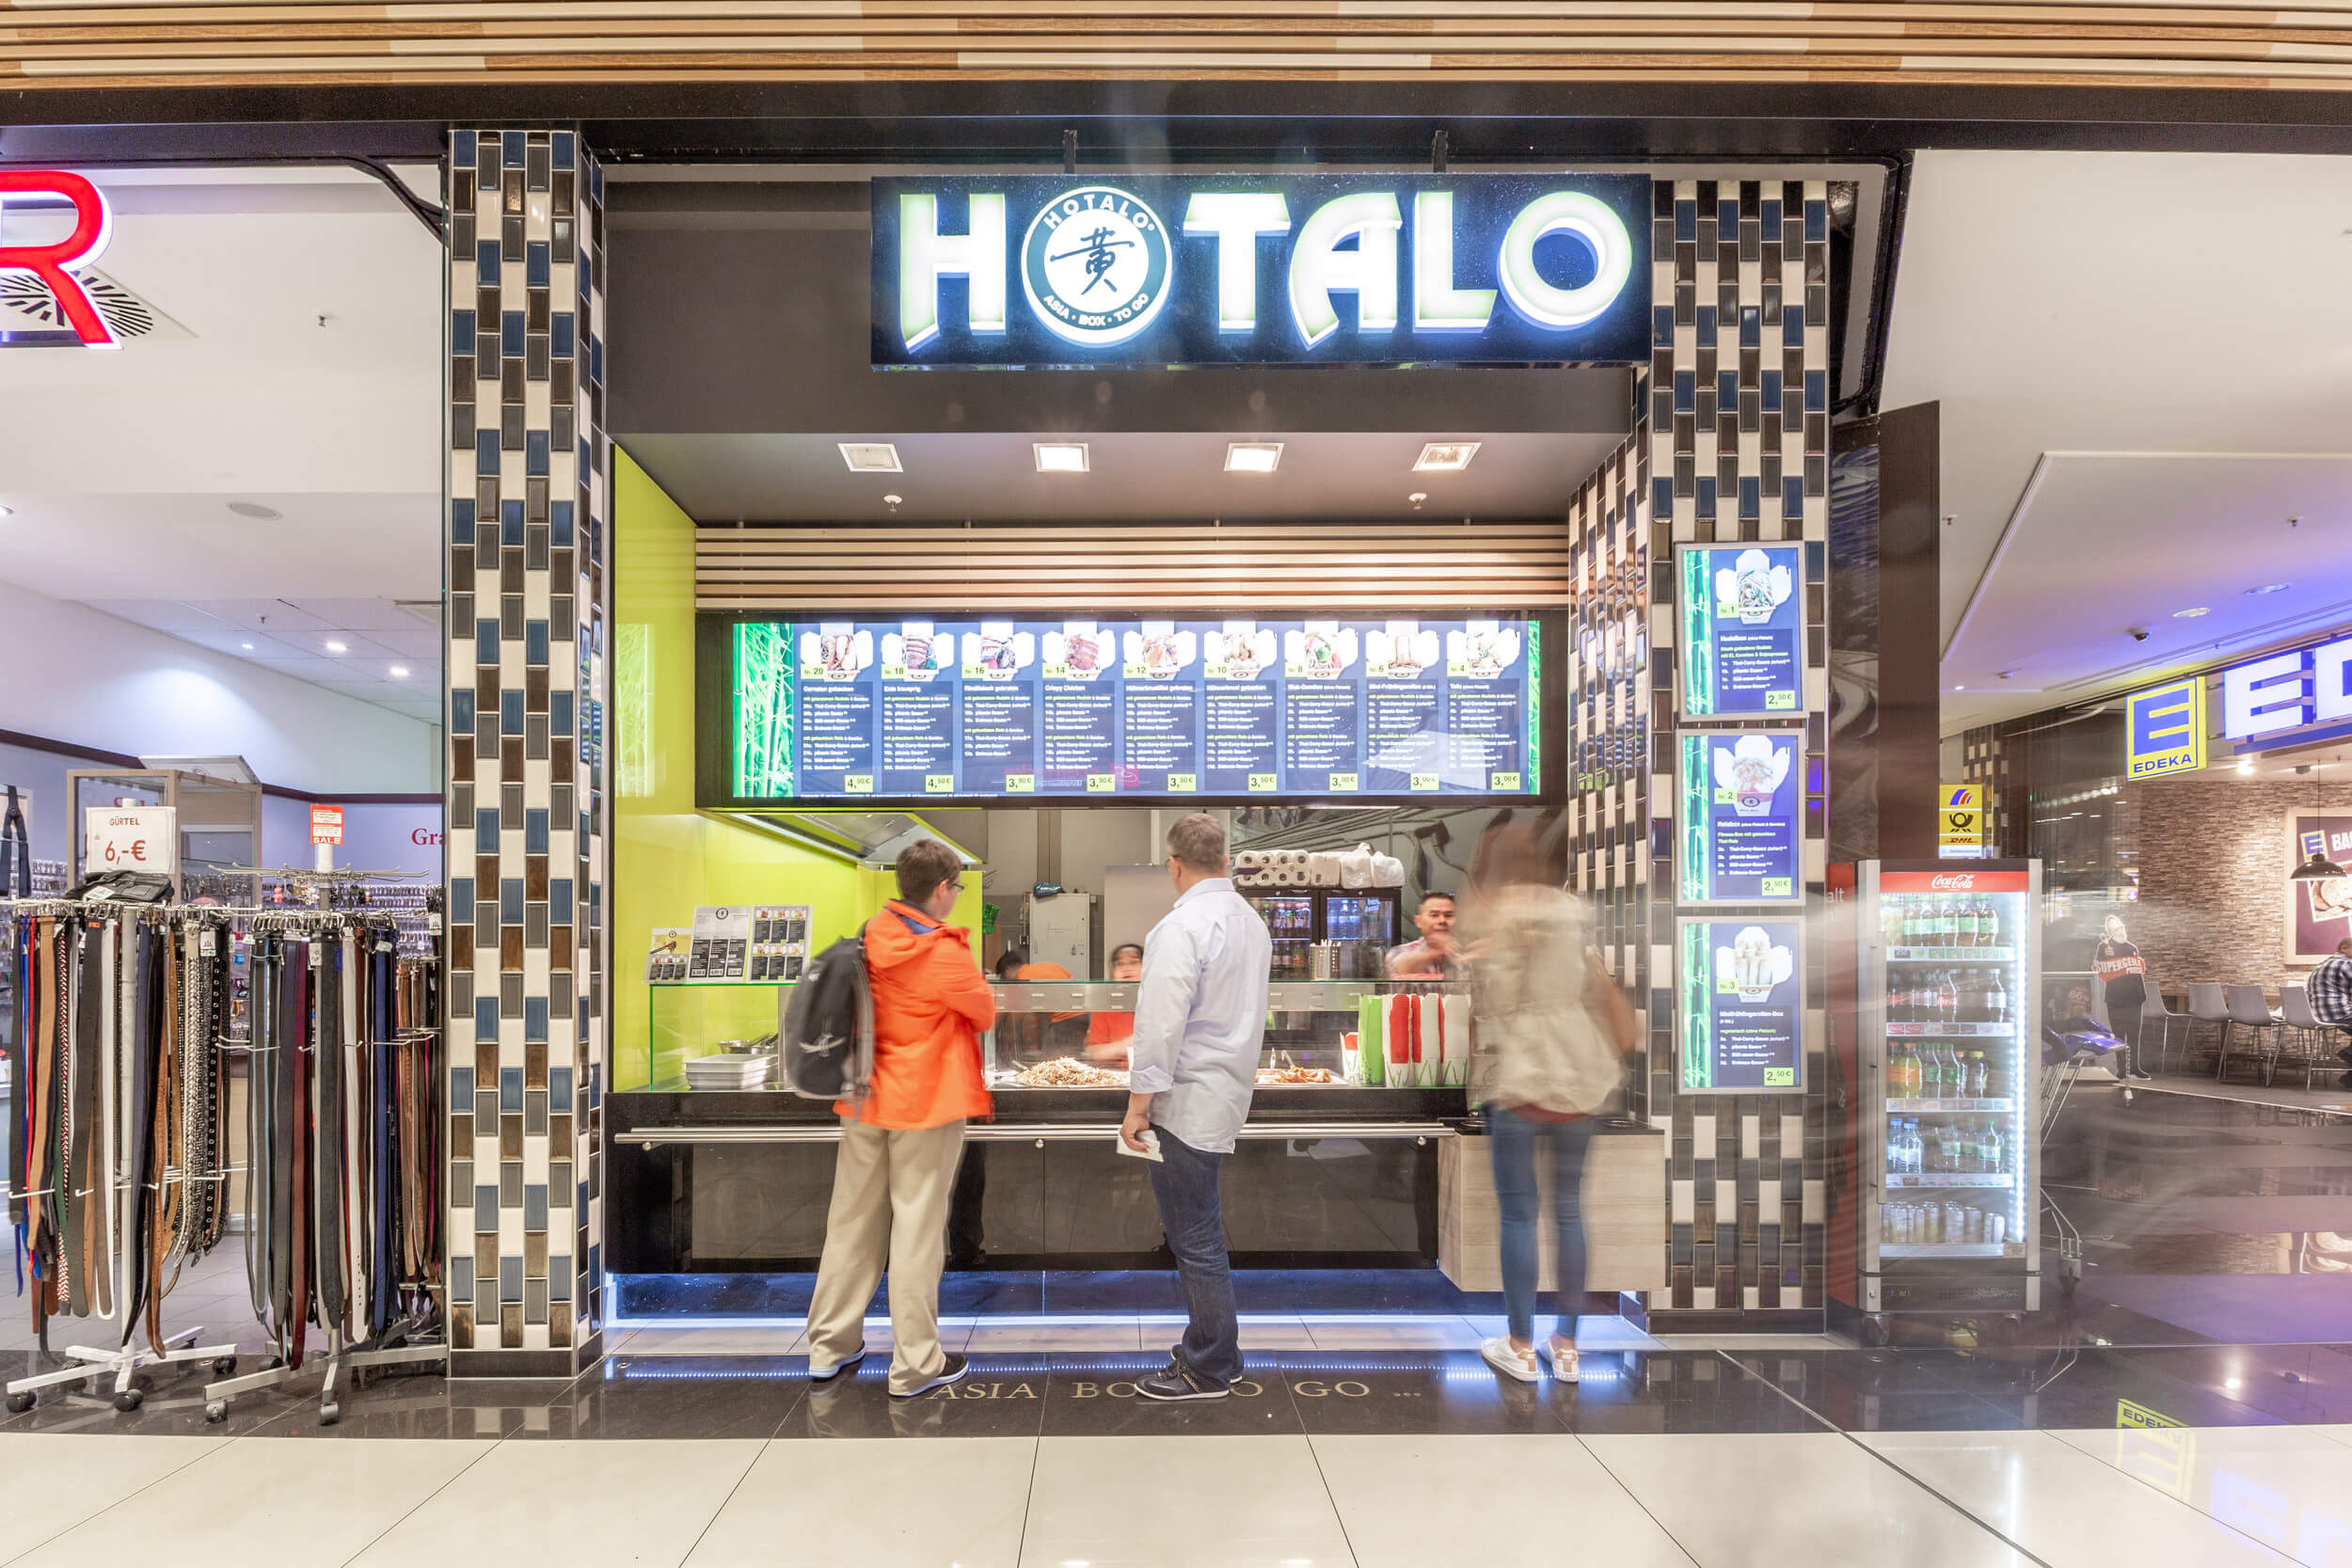 Hotalo - Asia Fast Food Restaurant in der Mall of Berlin